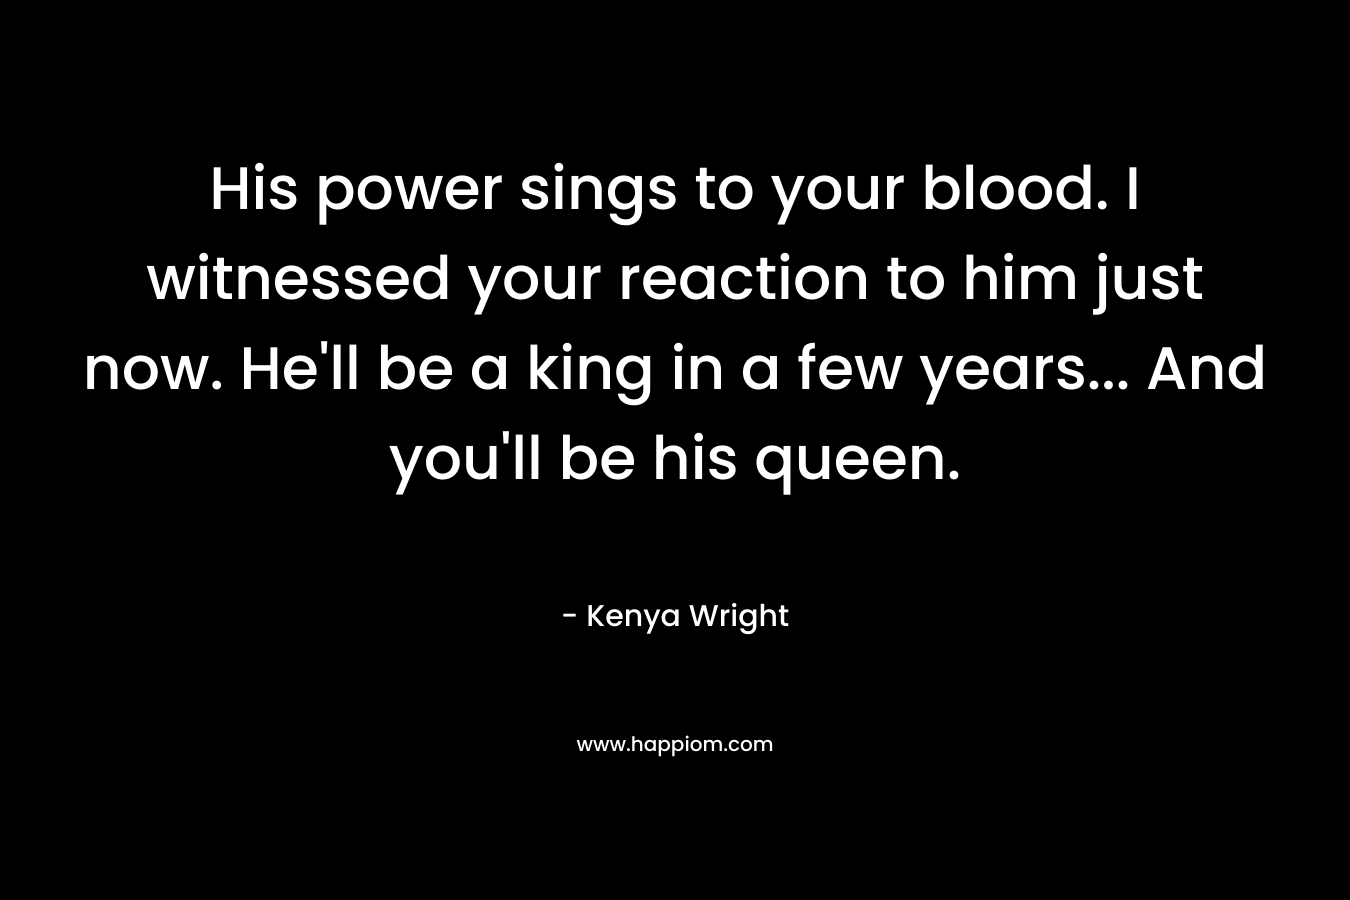 His power sings to your blood. I witnessed your reaction to him just now. He’ll be a king in a few years… And you’ll be his queen. – Kenya Wright